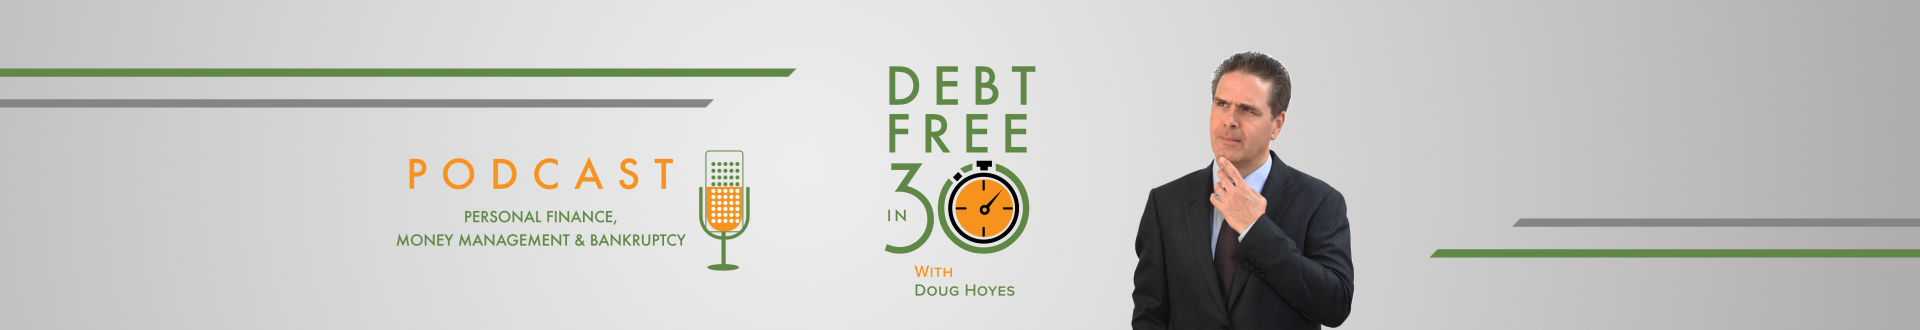 Debt Free in 30 Podcast Archive - Page 2